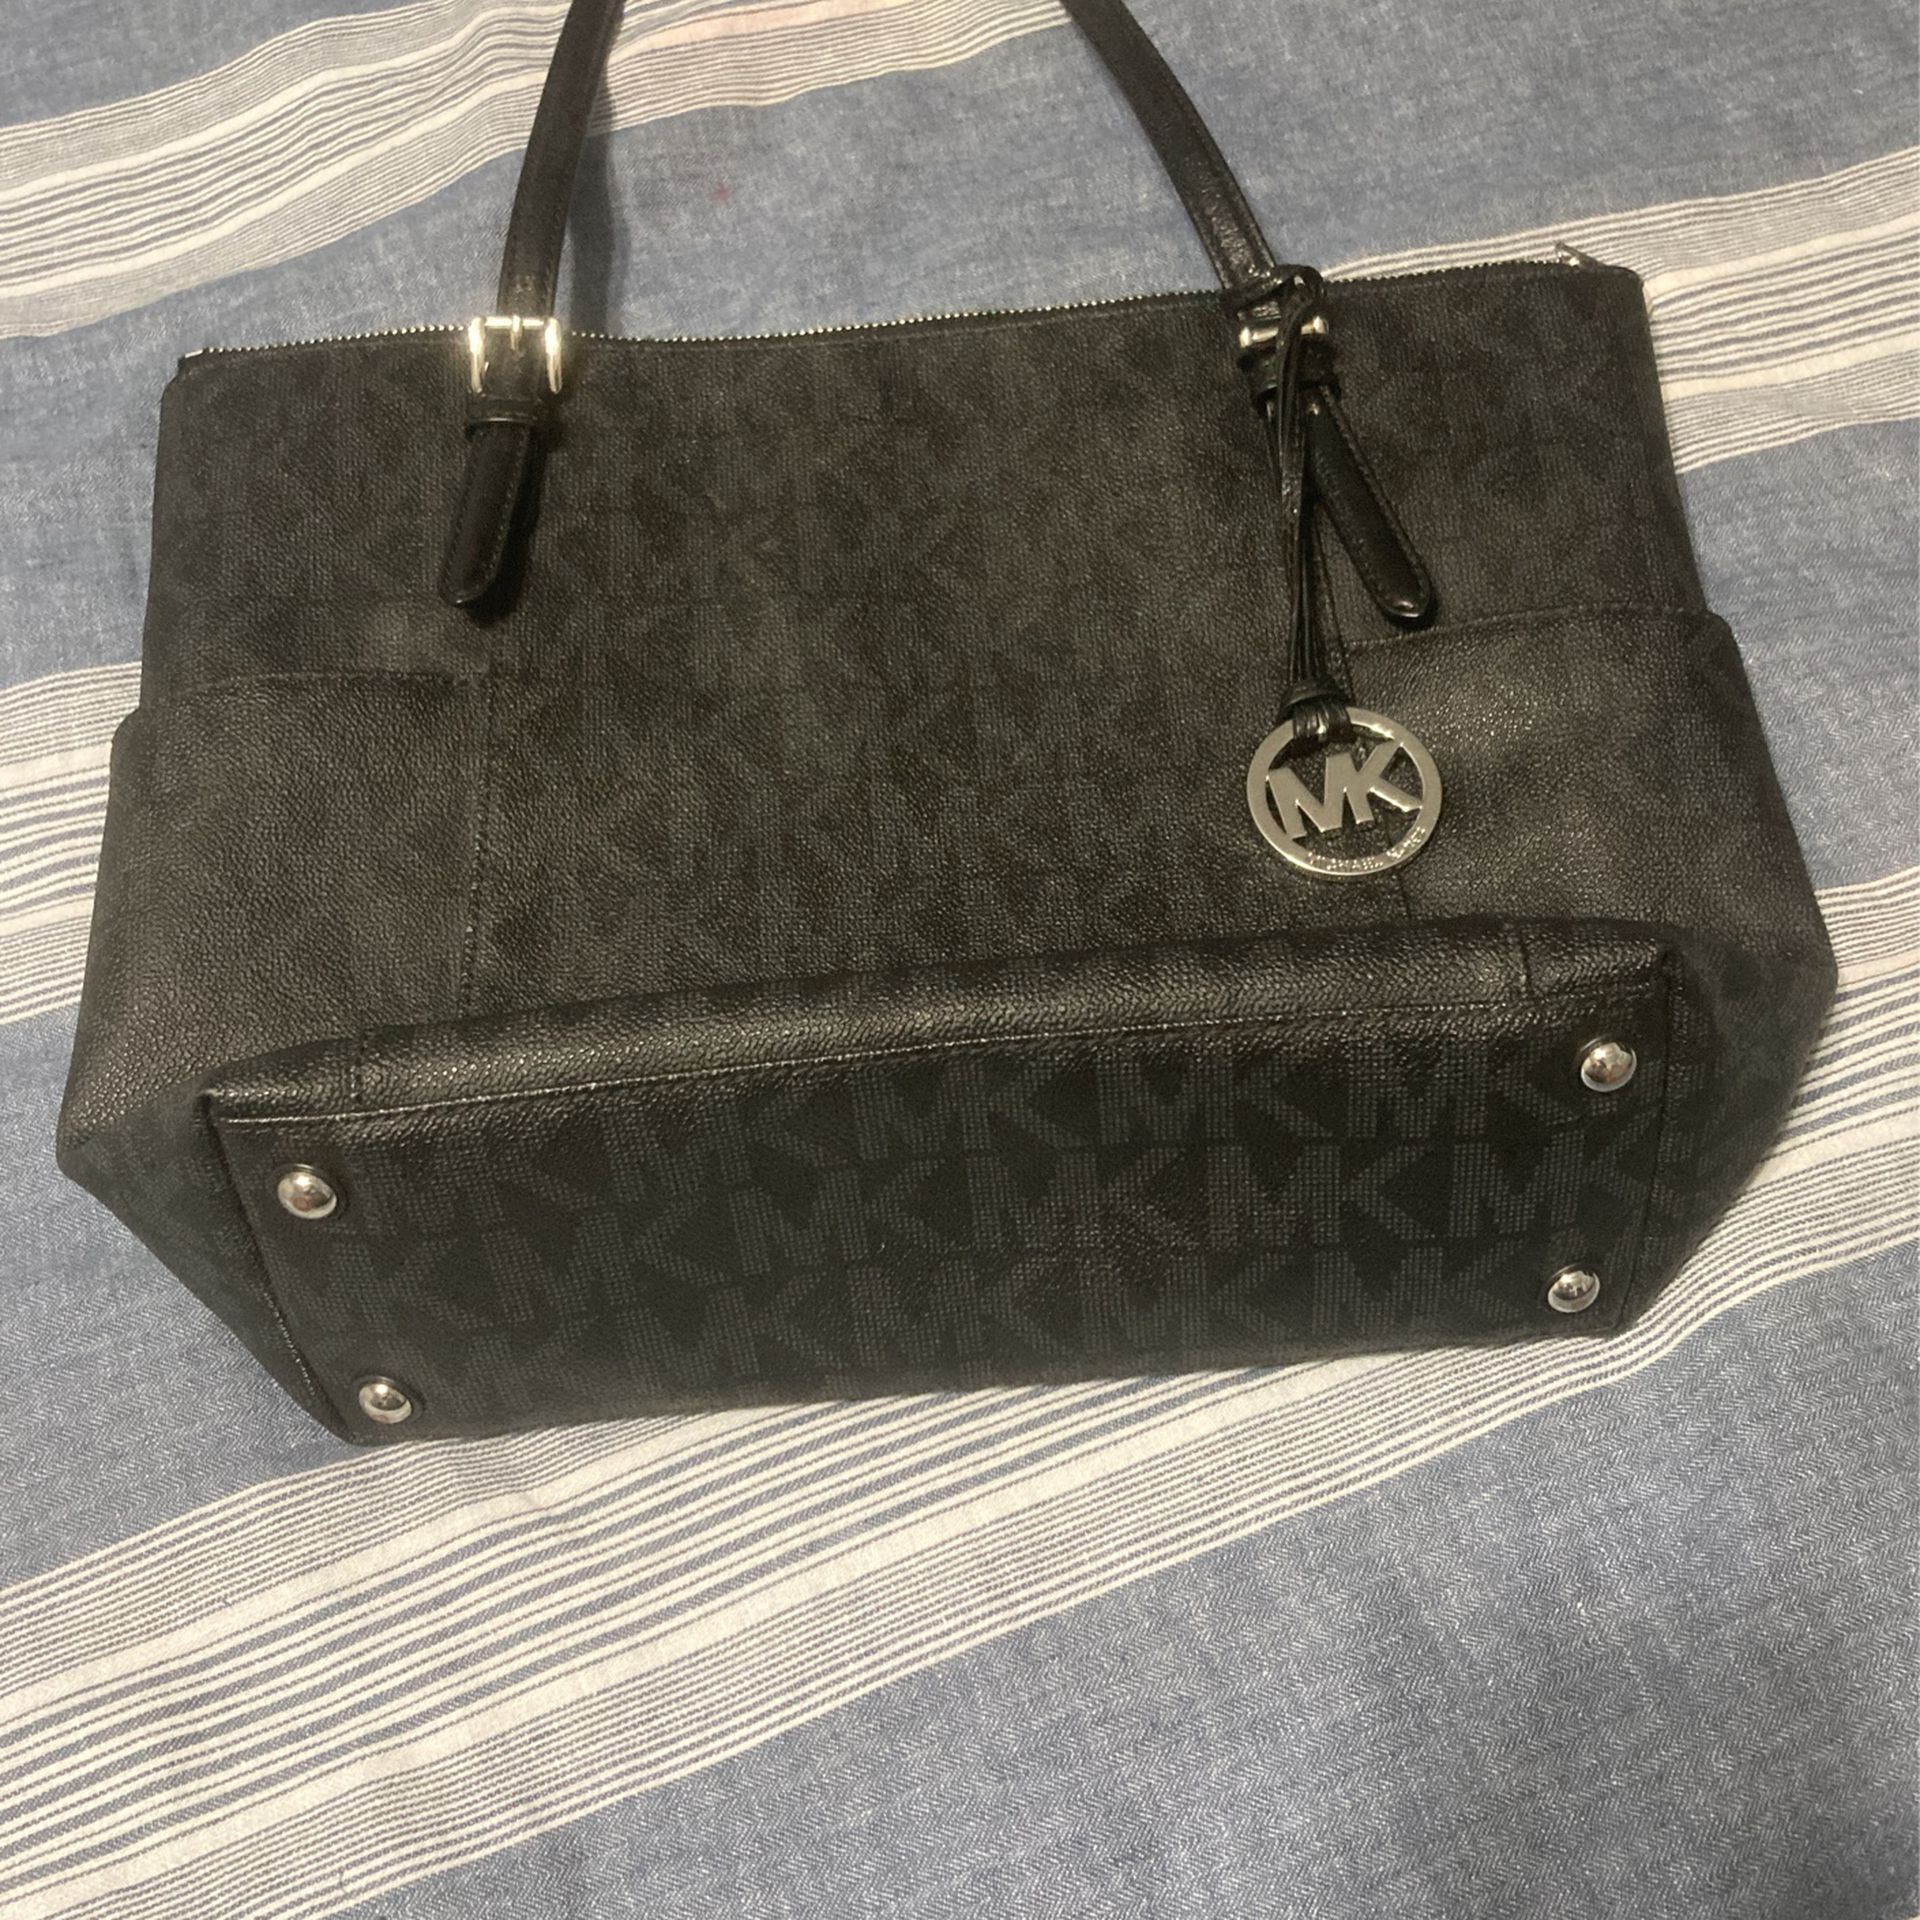 Michael Kors Jet Set Travel Large Saffiano Leather Purse for Sale in